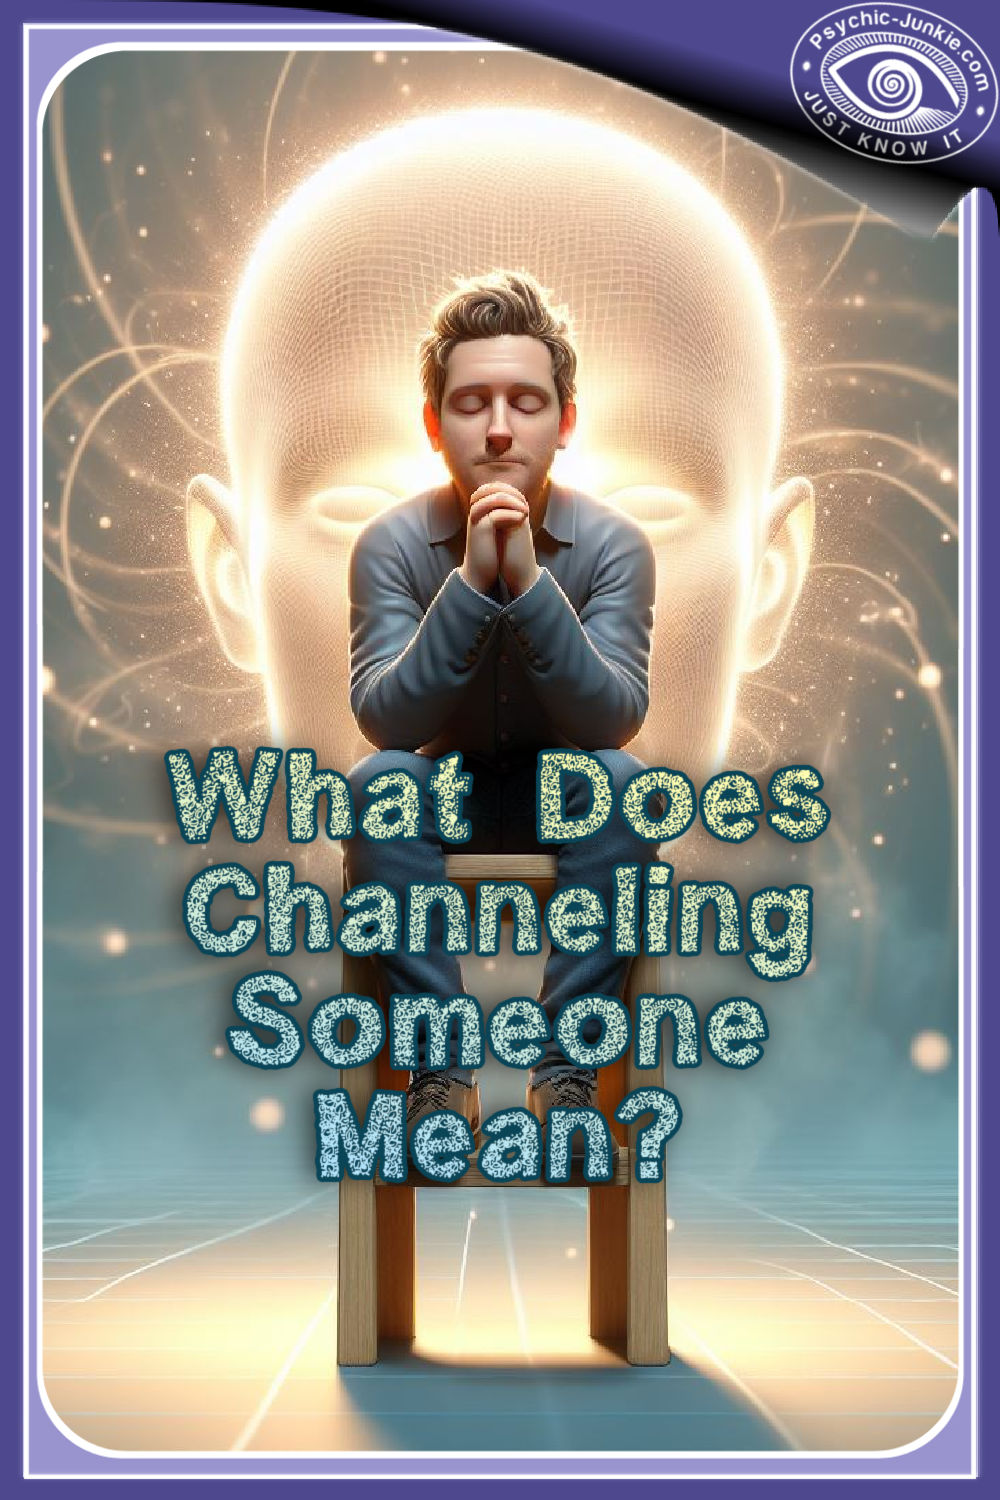 What does channeling someone mean?